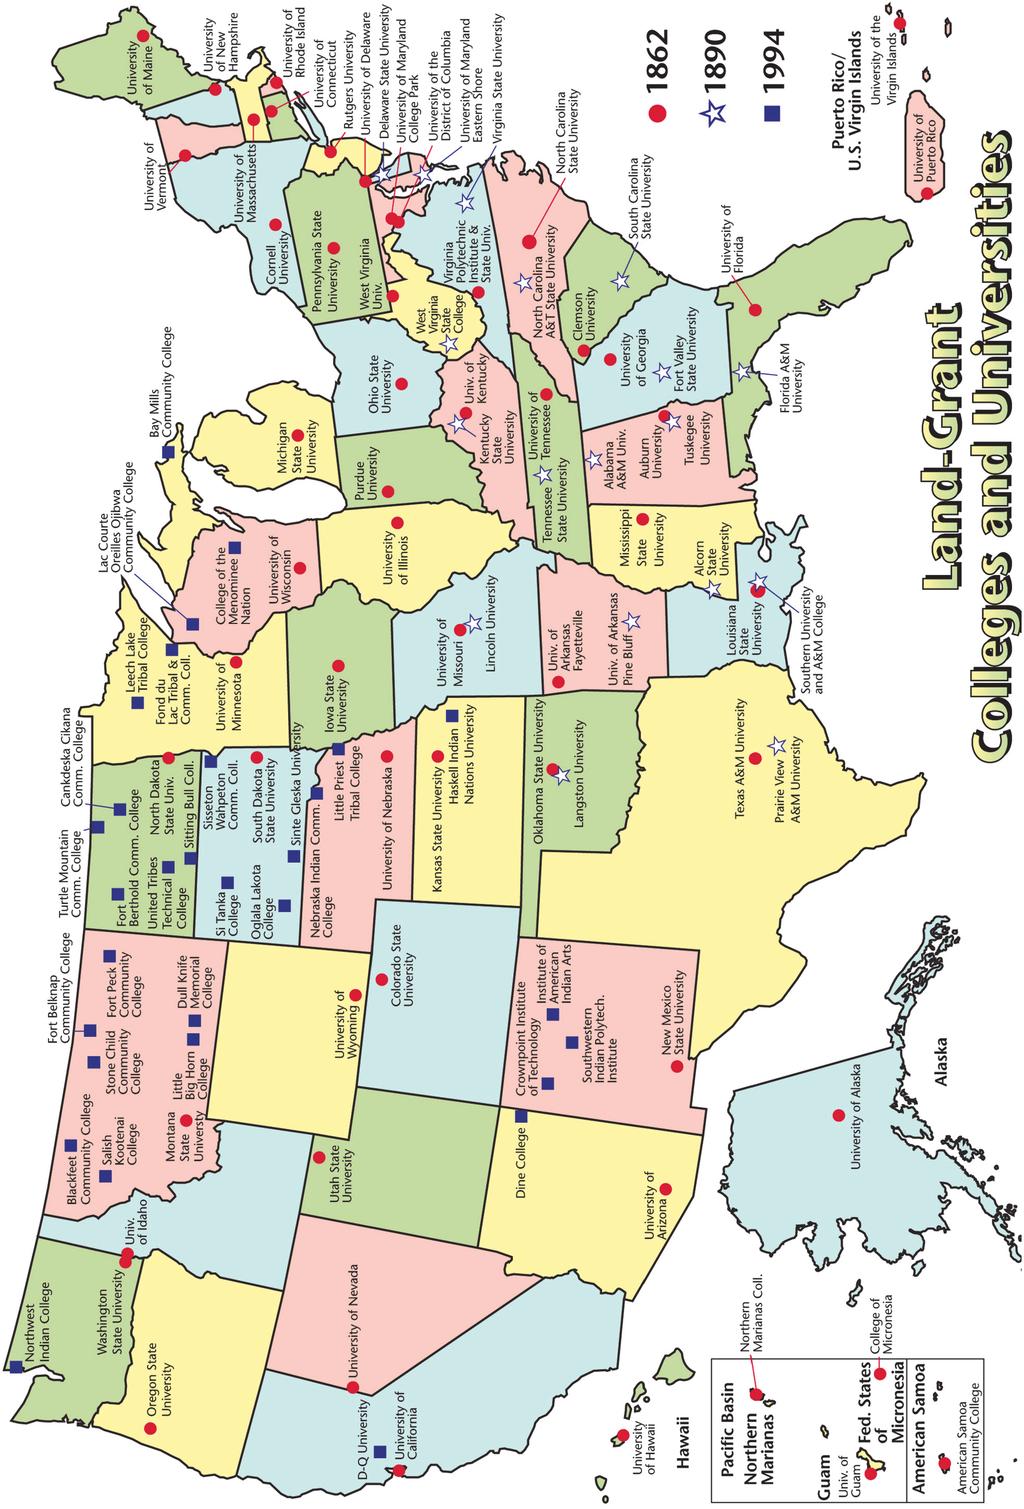 Fig. 1. Location of the 106 USA land grant institutions (S.